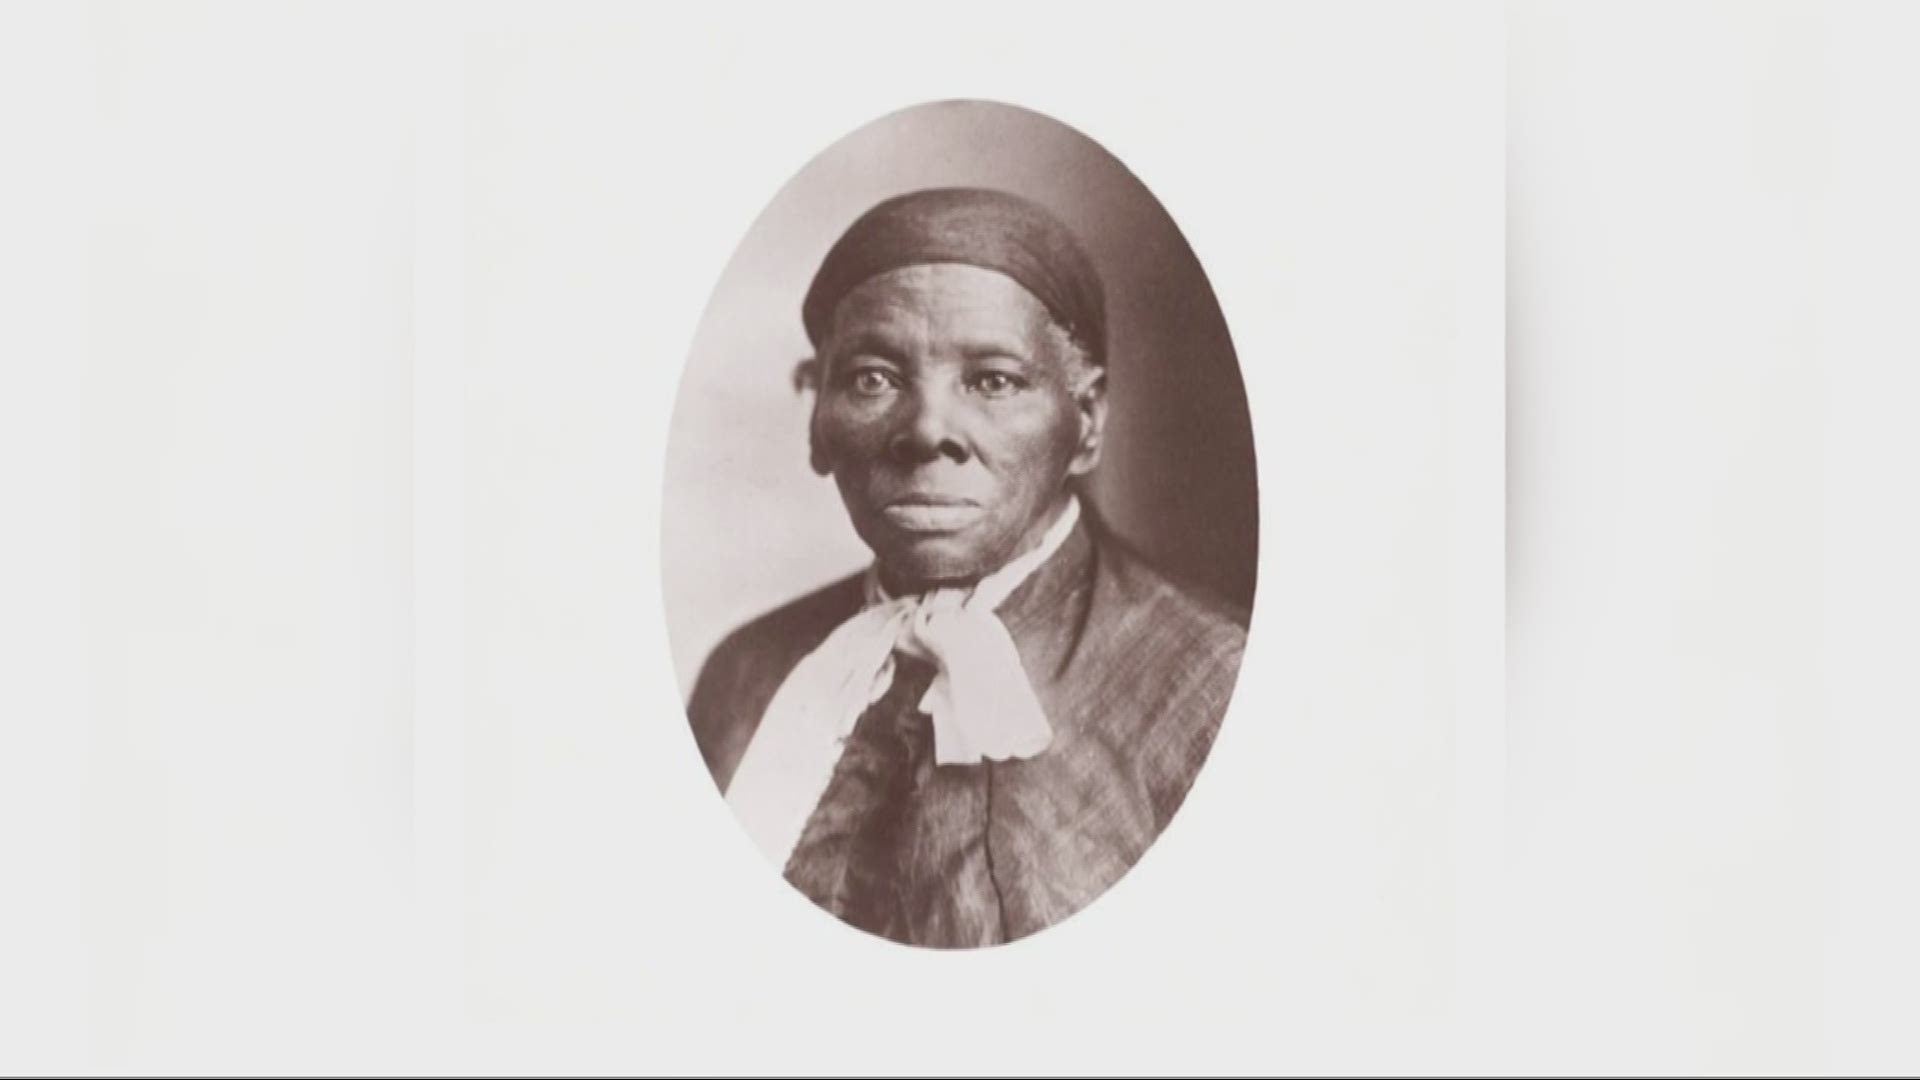 Maryland Governor Larry Hogan is urging the White House to put Maryland native Harriet Tubman on the $20 bill.